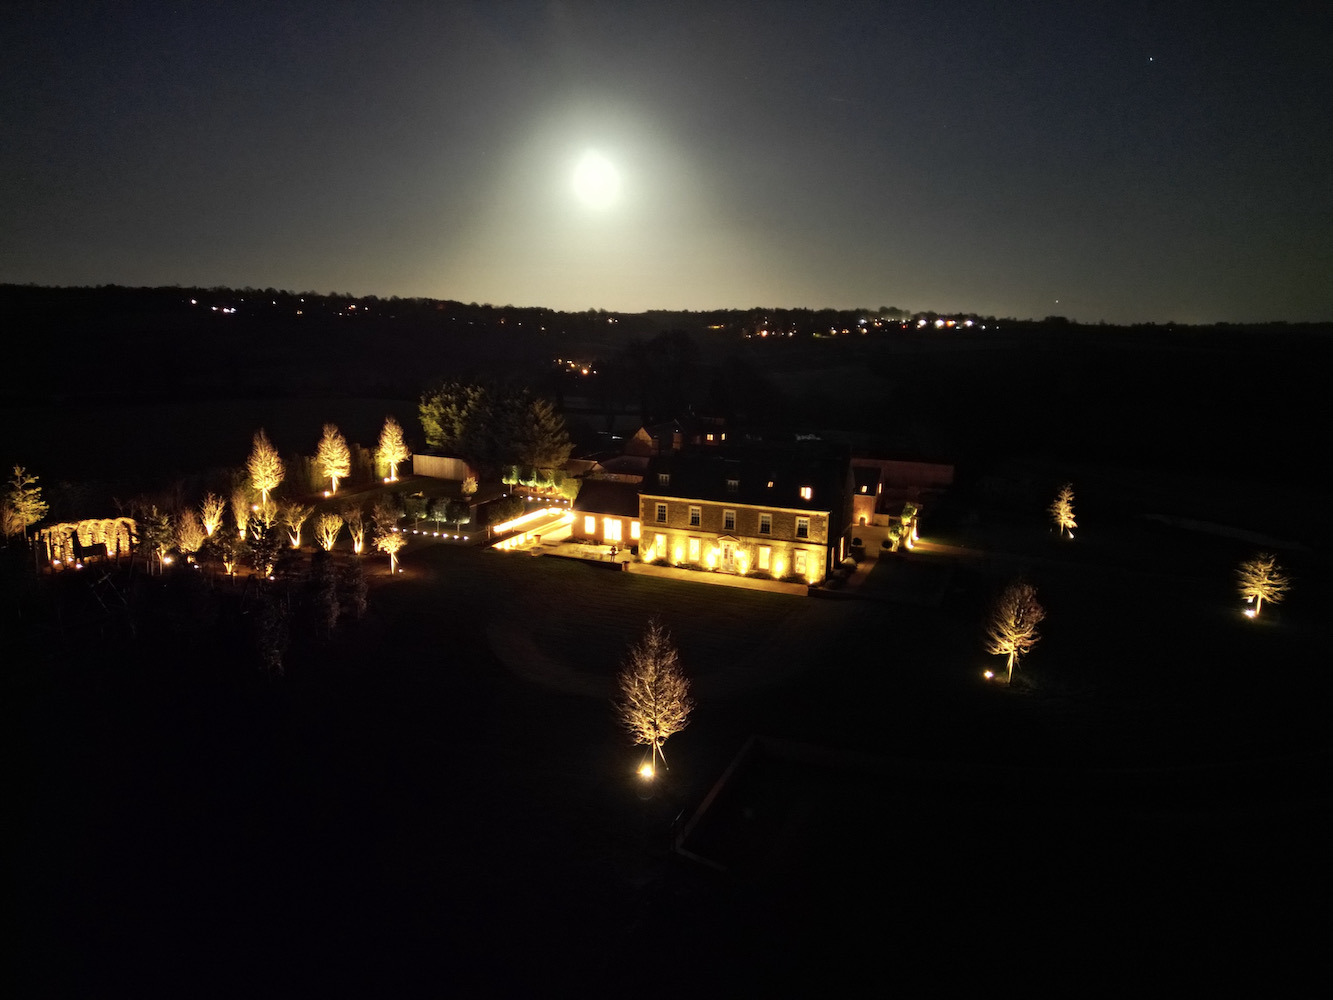 Drone footage of Sibford Park at night with lighting scheme